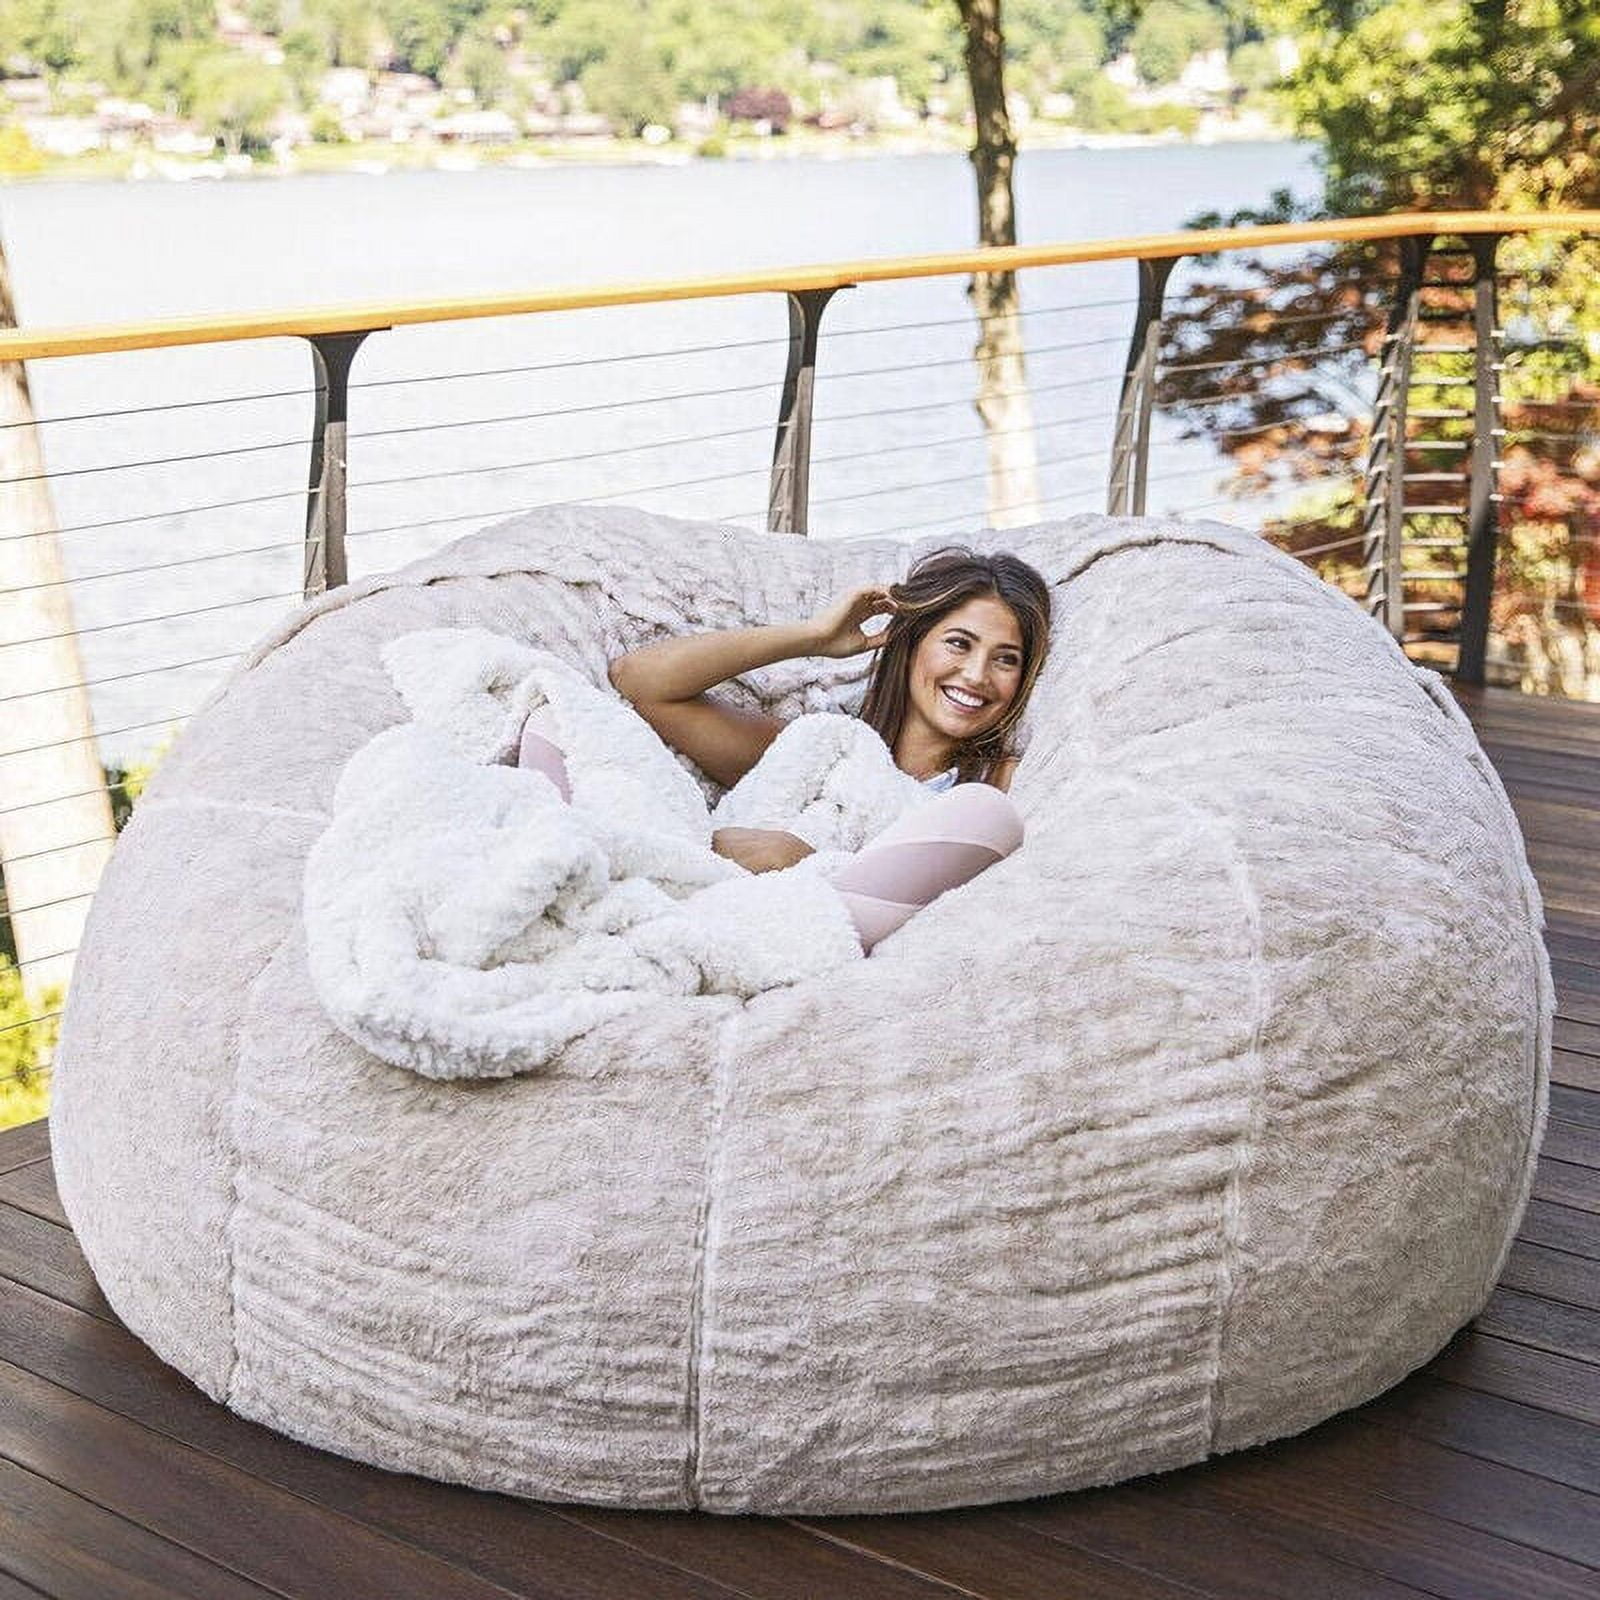 5FT Giant Sherpa Ultra Soft Bean Bag Bed (No Filler, Cover only), Large  Round Soft Fluffy Bean Bag for Adults, Machine Washable Big Size Bean Bag